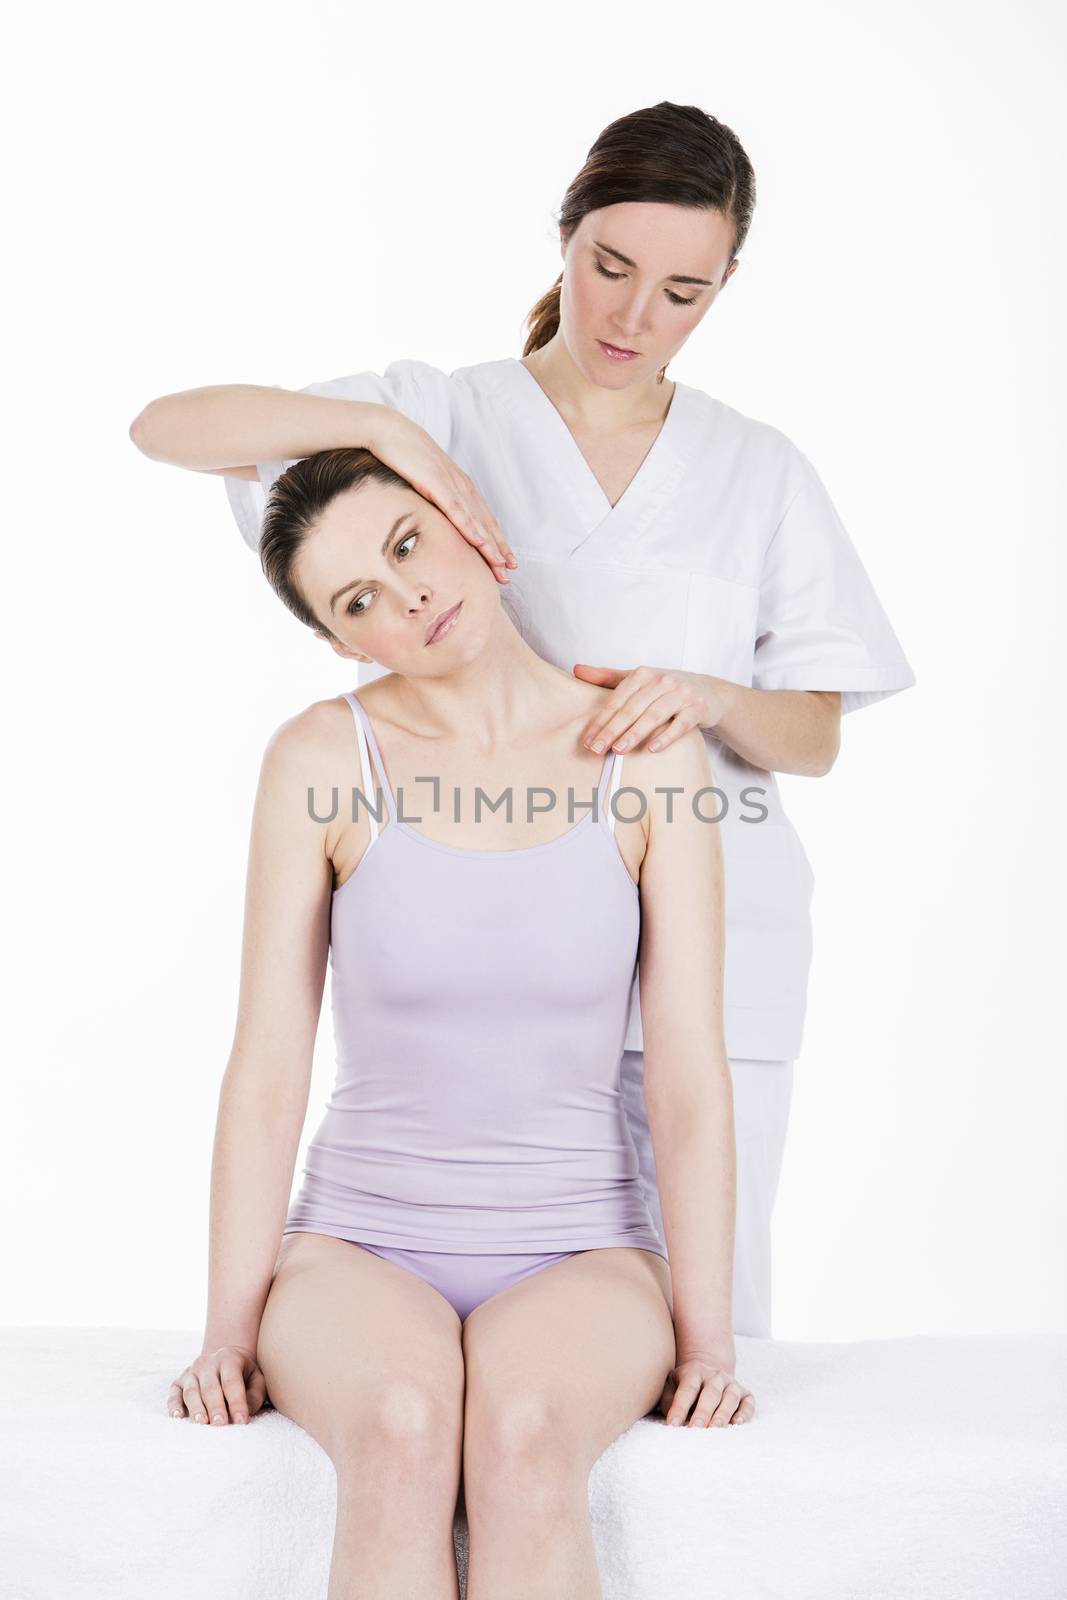 physical therapist gives massage to woman neck